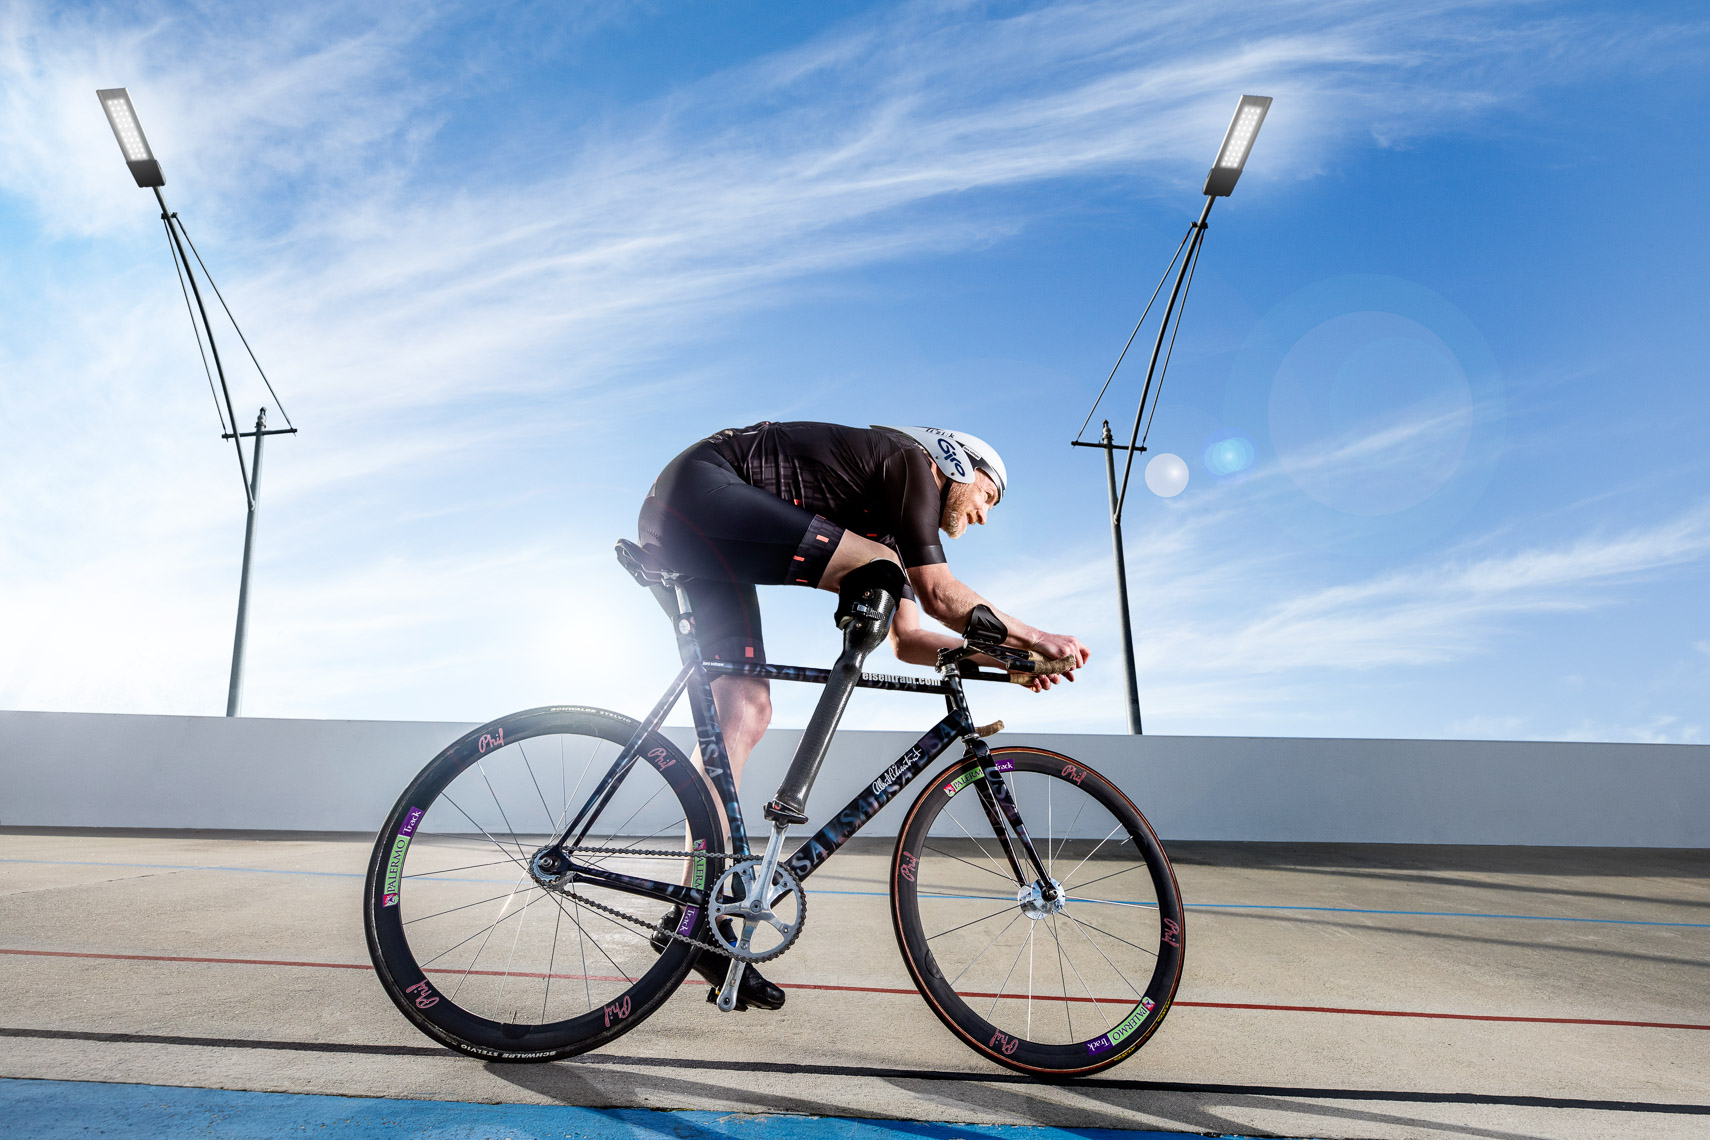 On location shoot of amputee athlete by San Francisco advertising, editorial, annual report photographer Robert Houser.